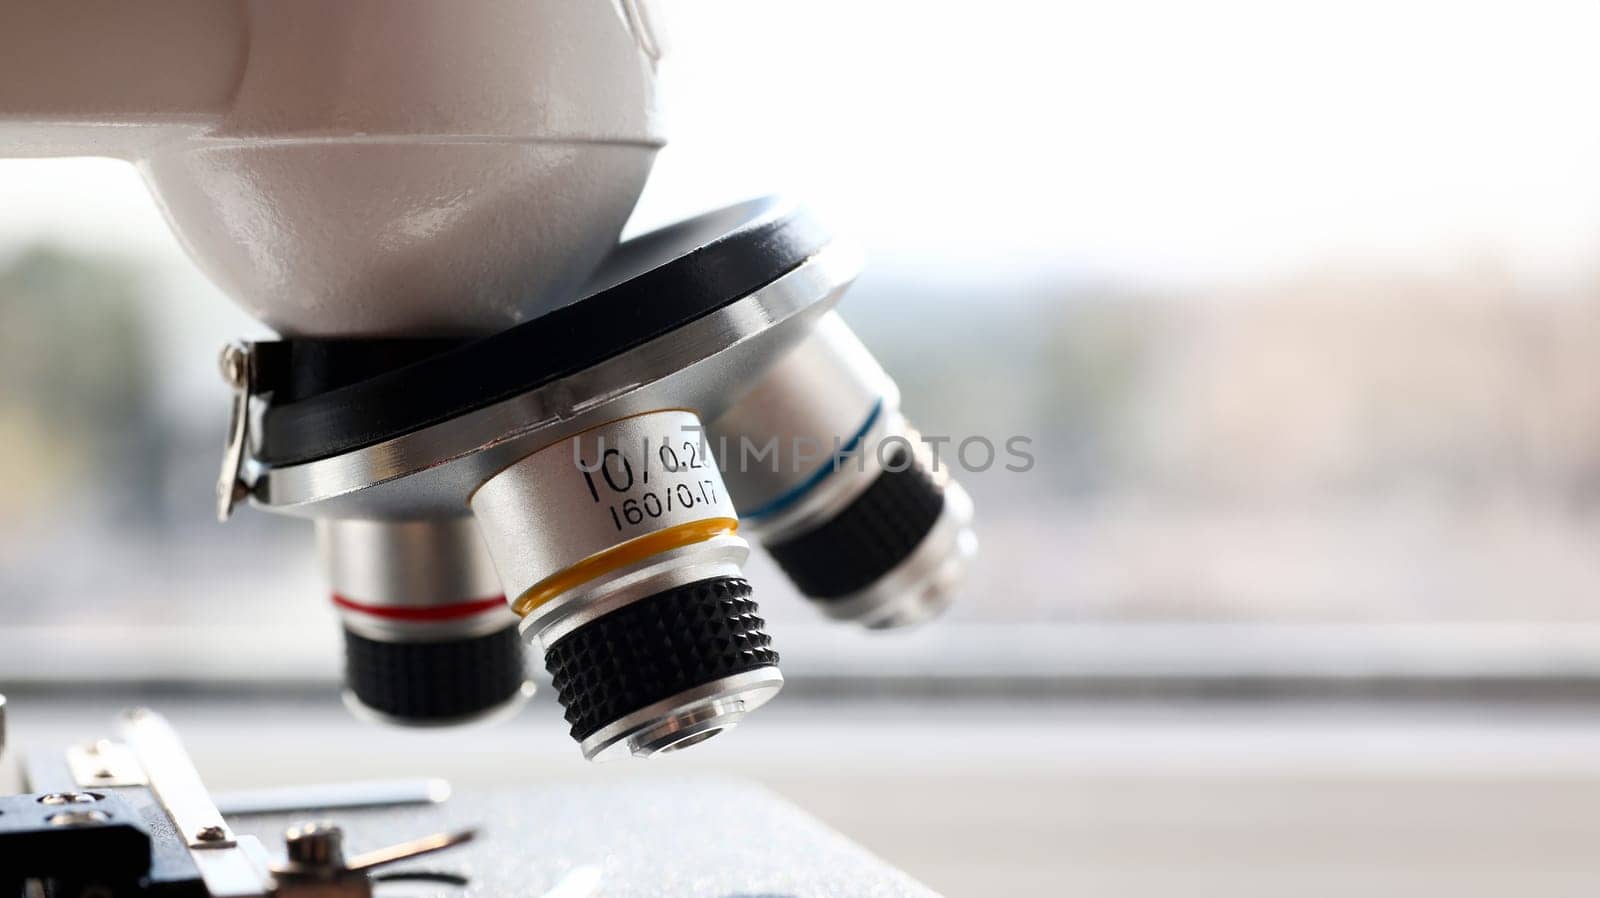 The head microscope on the background of by kuprevich